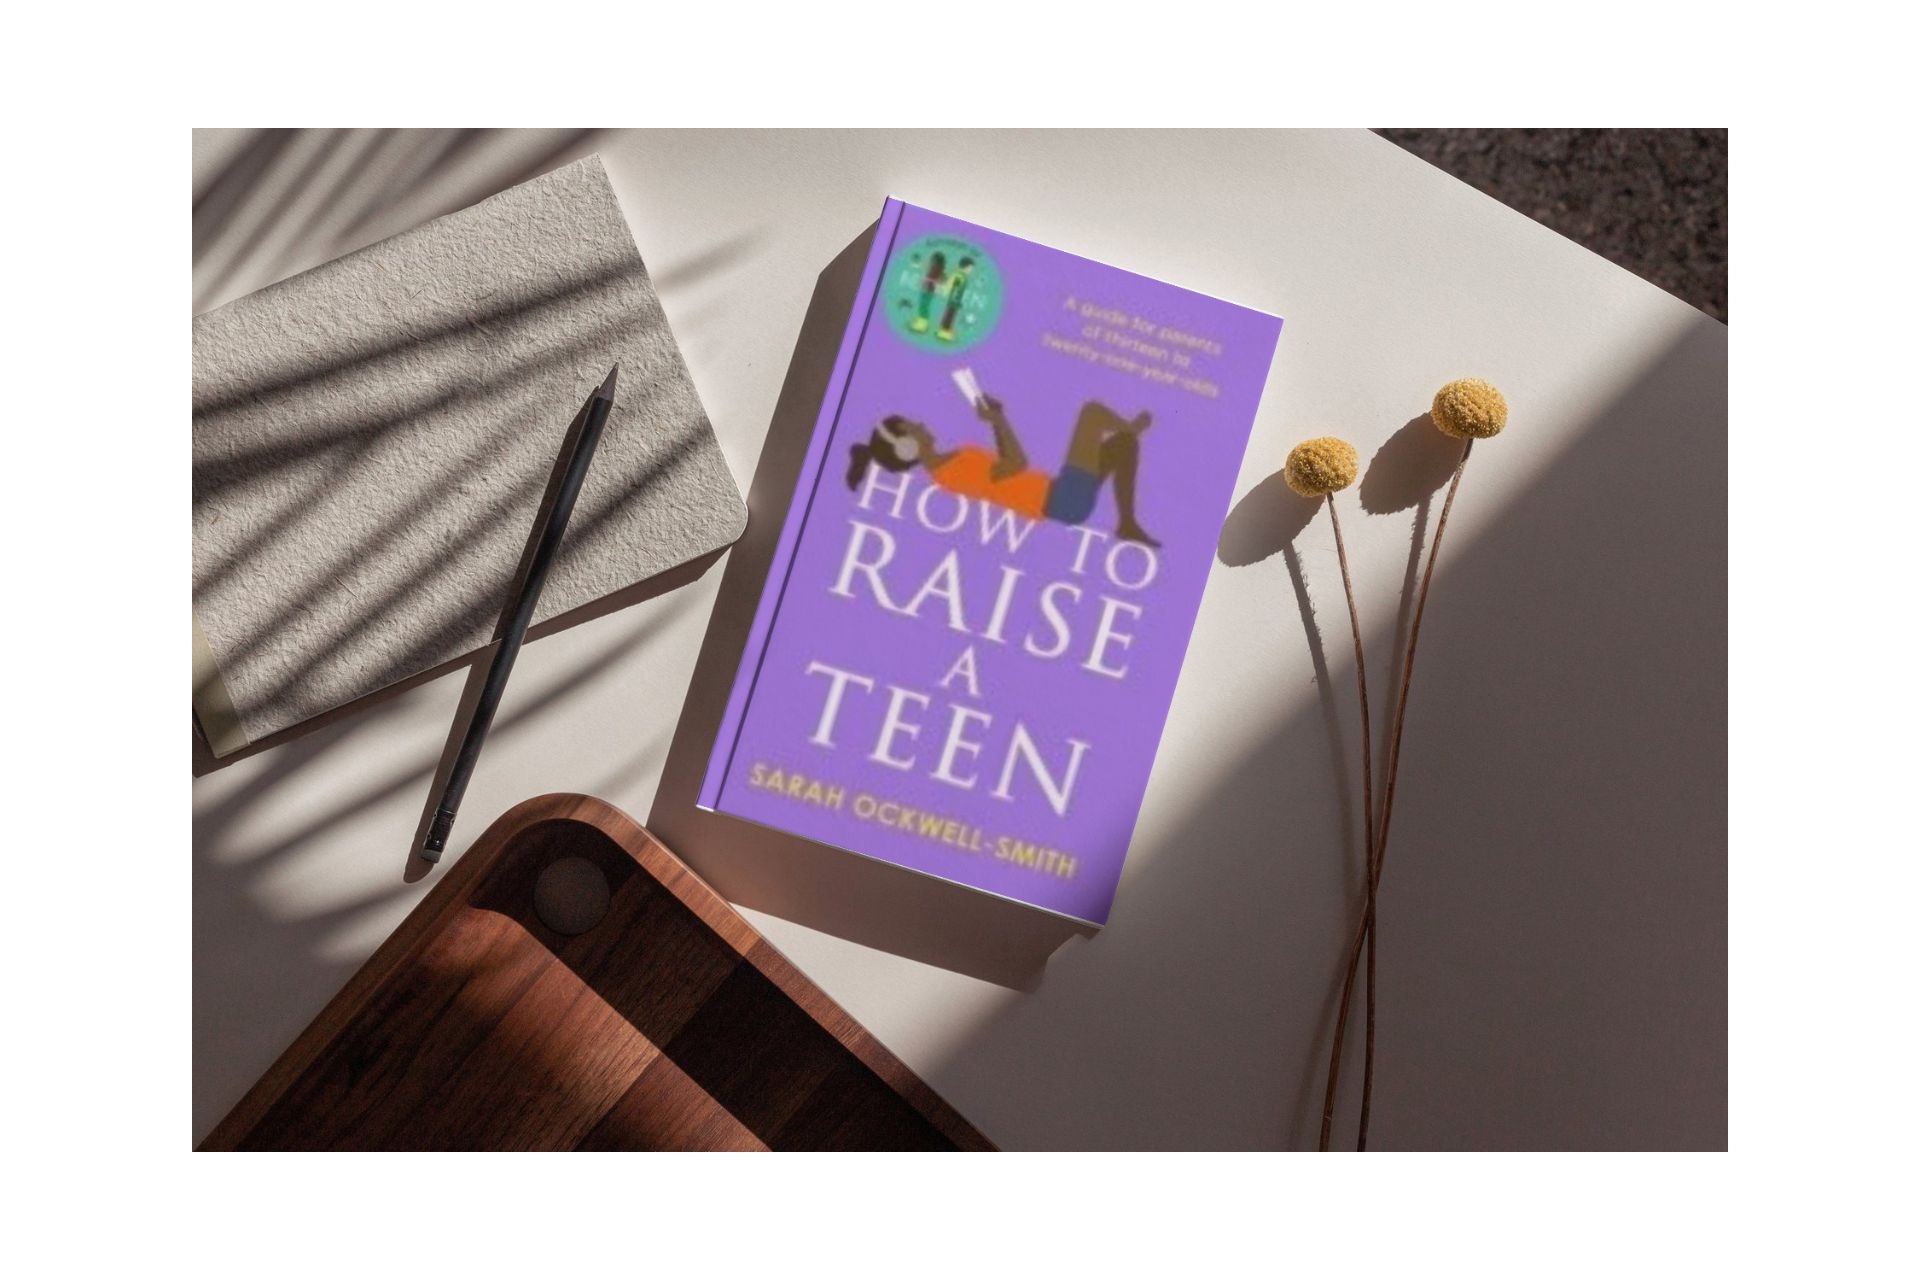 Parenting - How To Raise a Teen by Sarah Ockwell-Smith